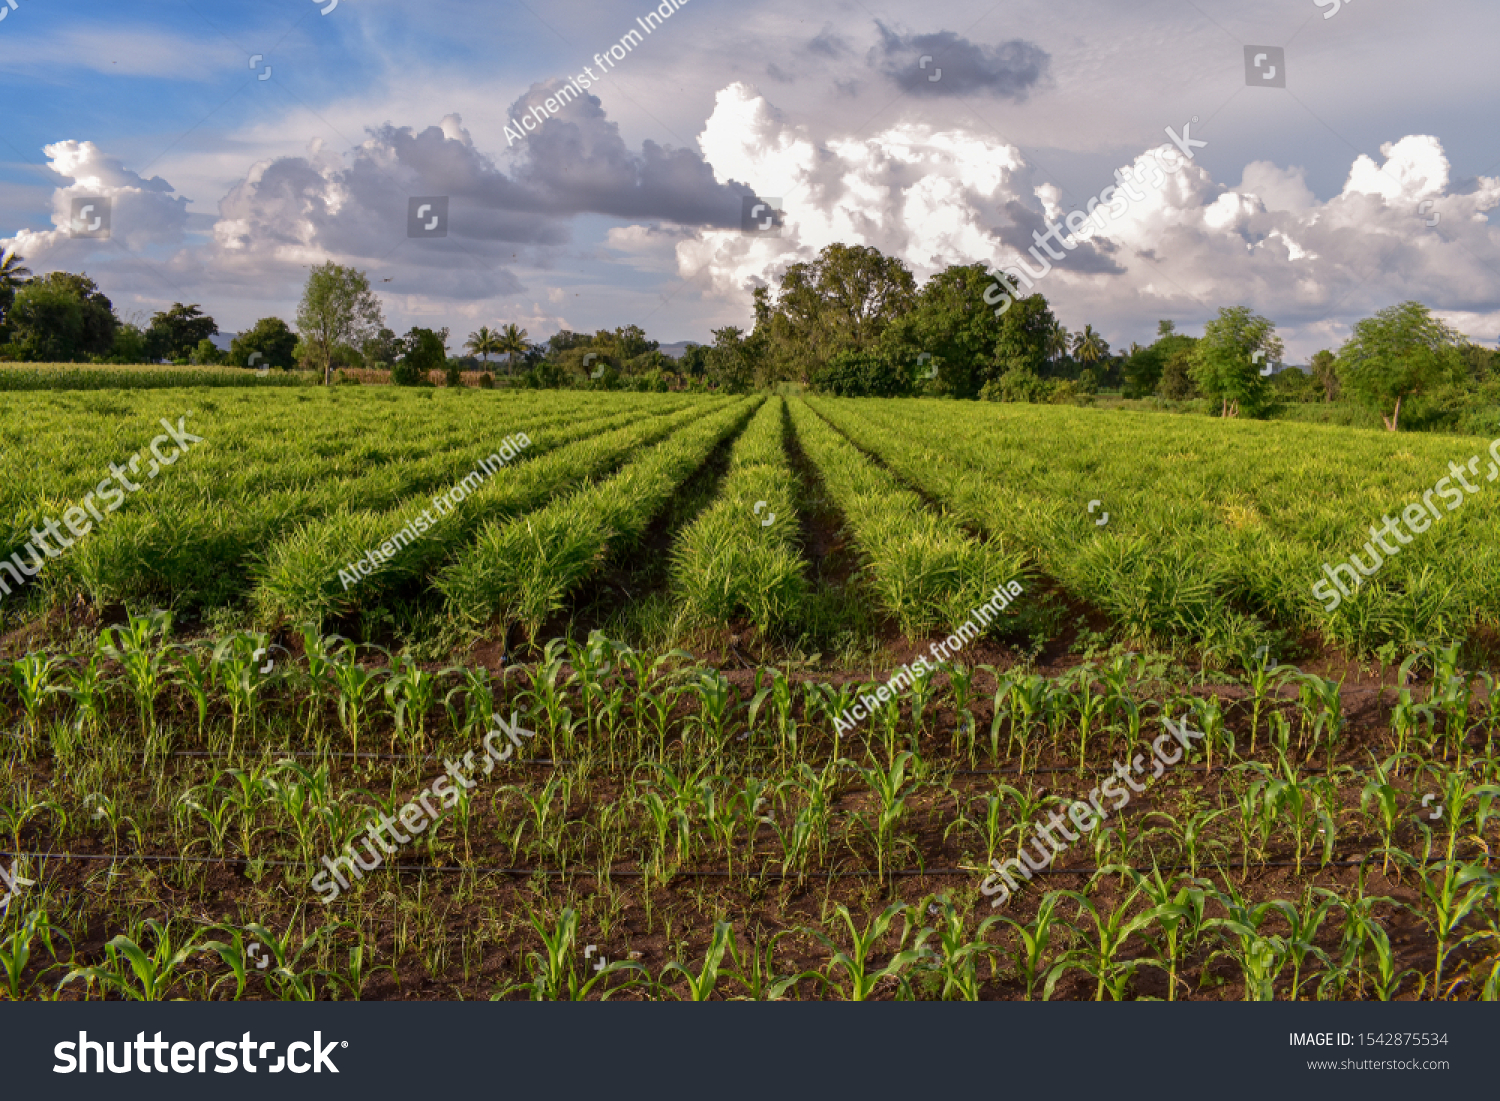 Crop rotation. Maize and Ginger (zingiber officinale) field. An agriculture background. Landscape of Agriculture field.  #1542875534